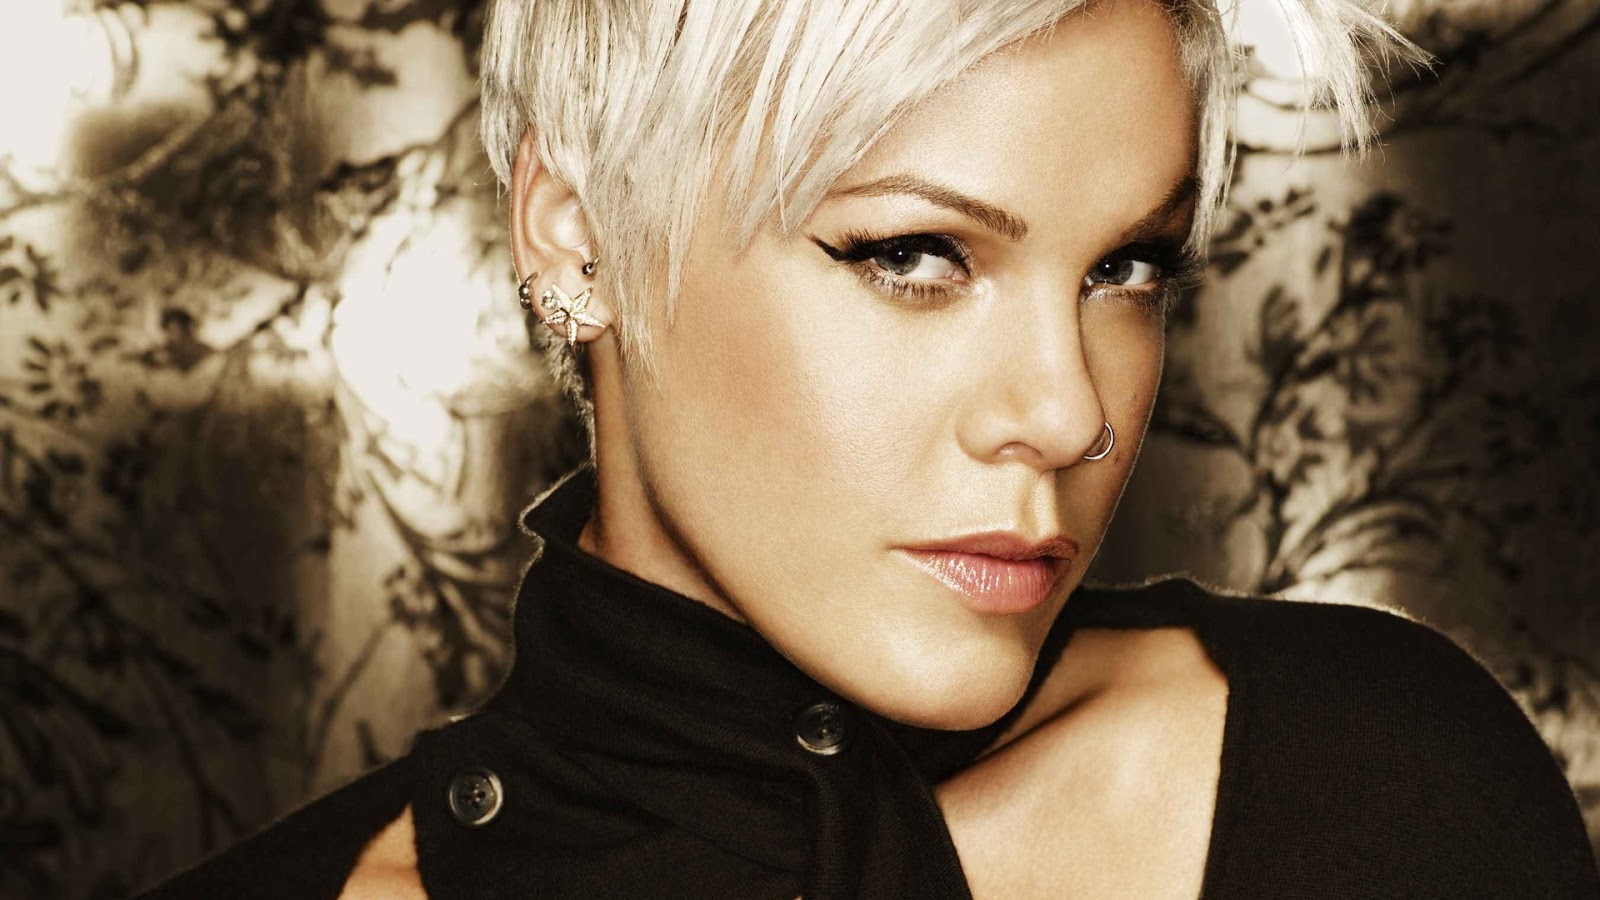 P Nk Wallpapers.